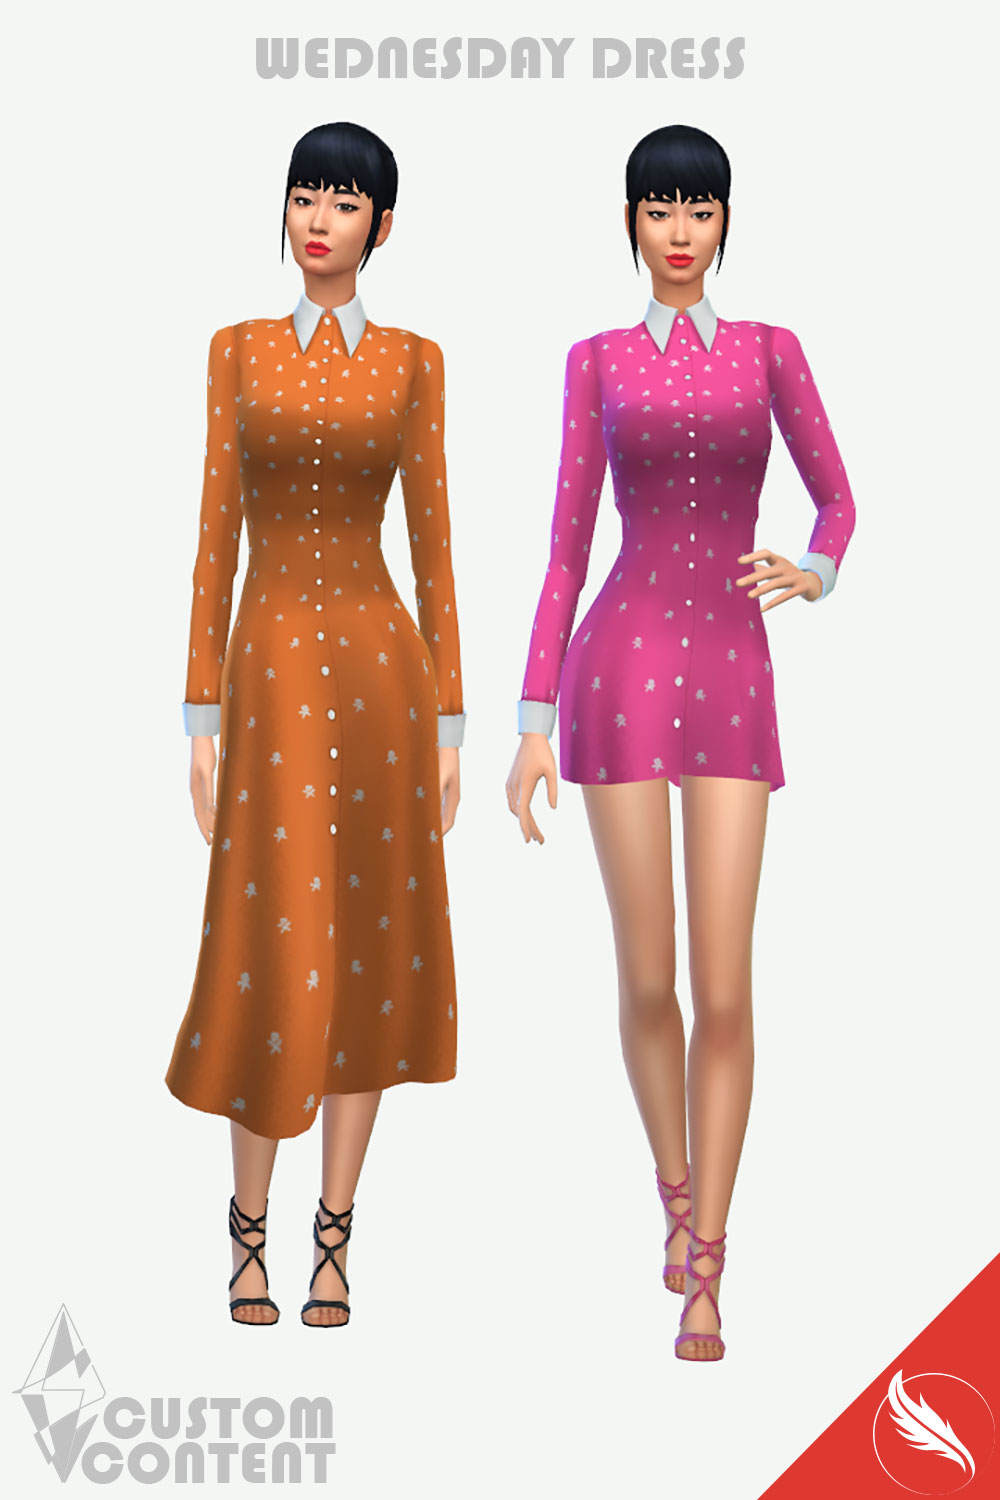 The Sims 4 CC Wednesday Dress